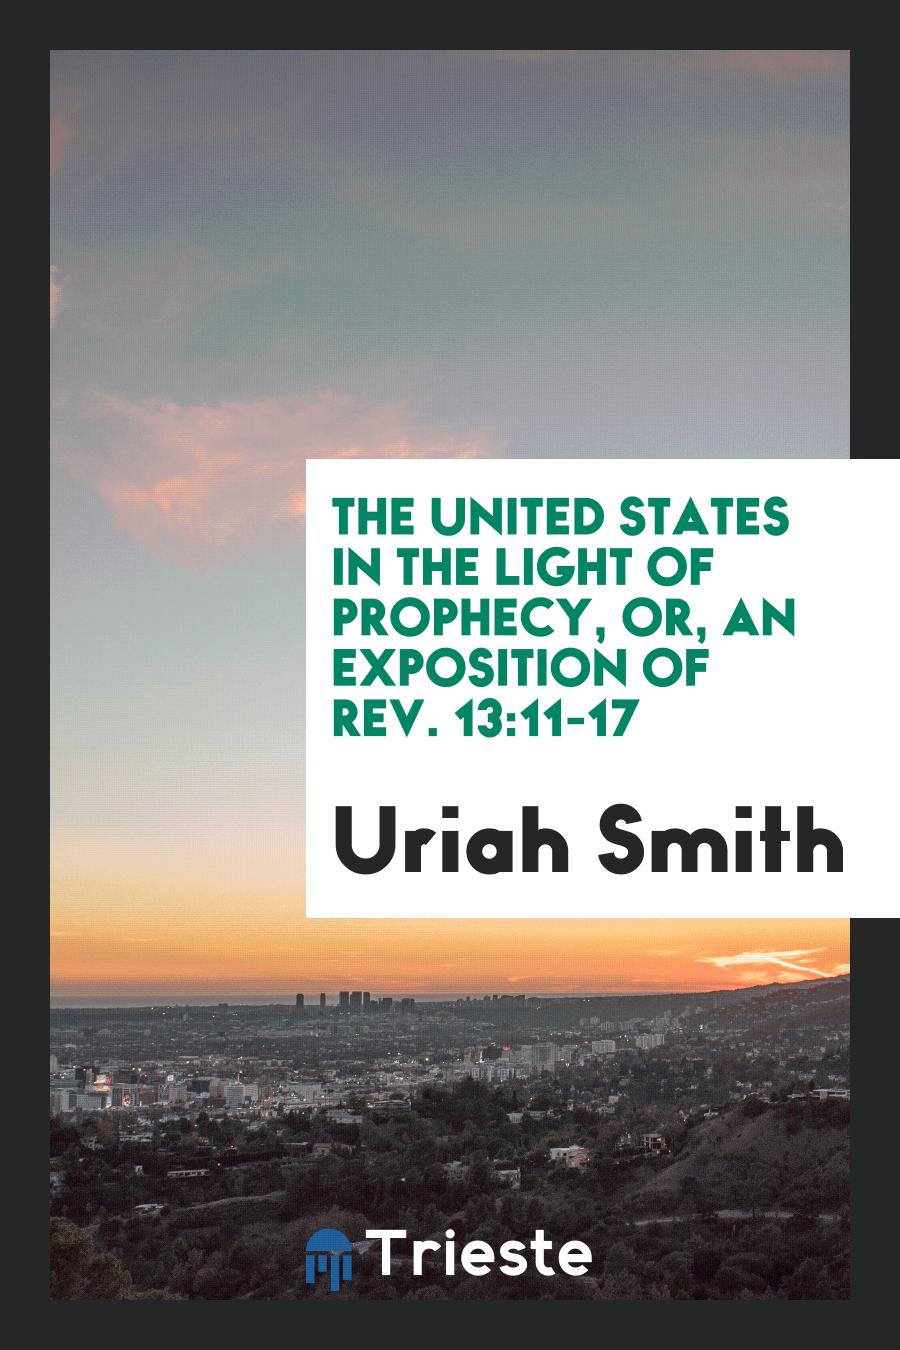 The United States in the Light of Prophecy, Or, An Exposition of Rev. 13:11-17